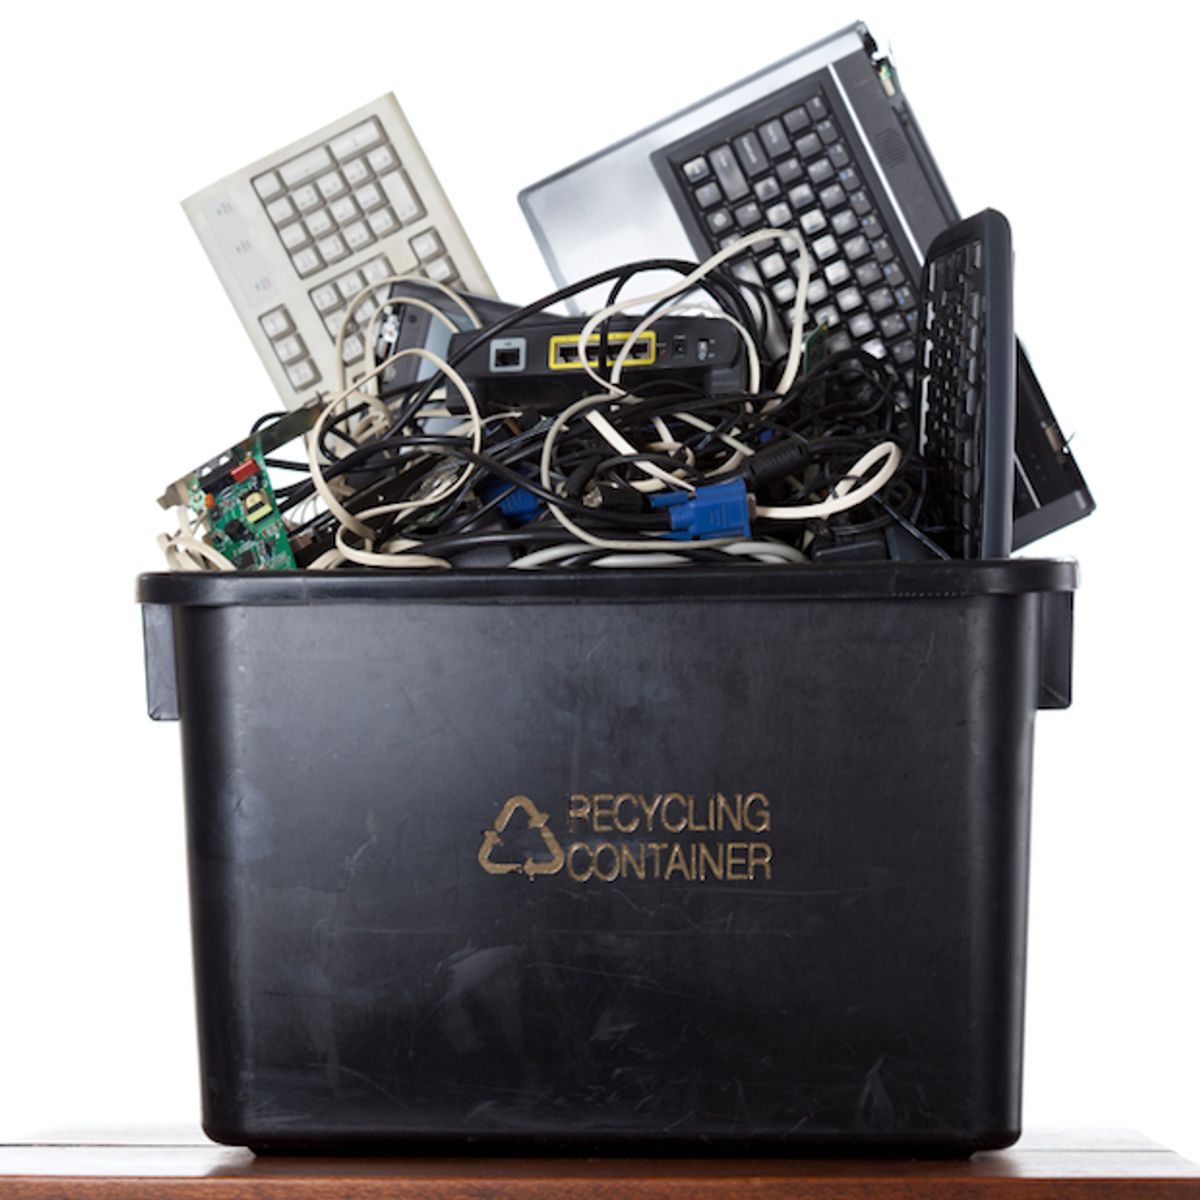 Global E-Waste Will Jump 33 Percent in the Next Five Years